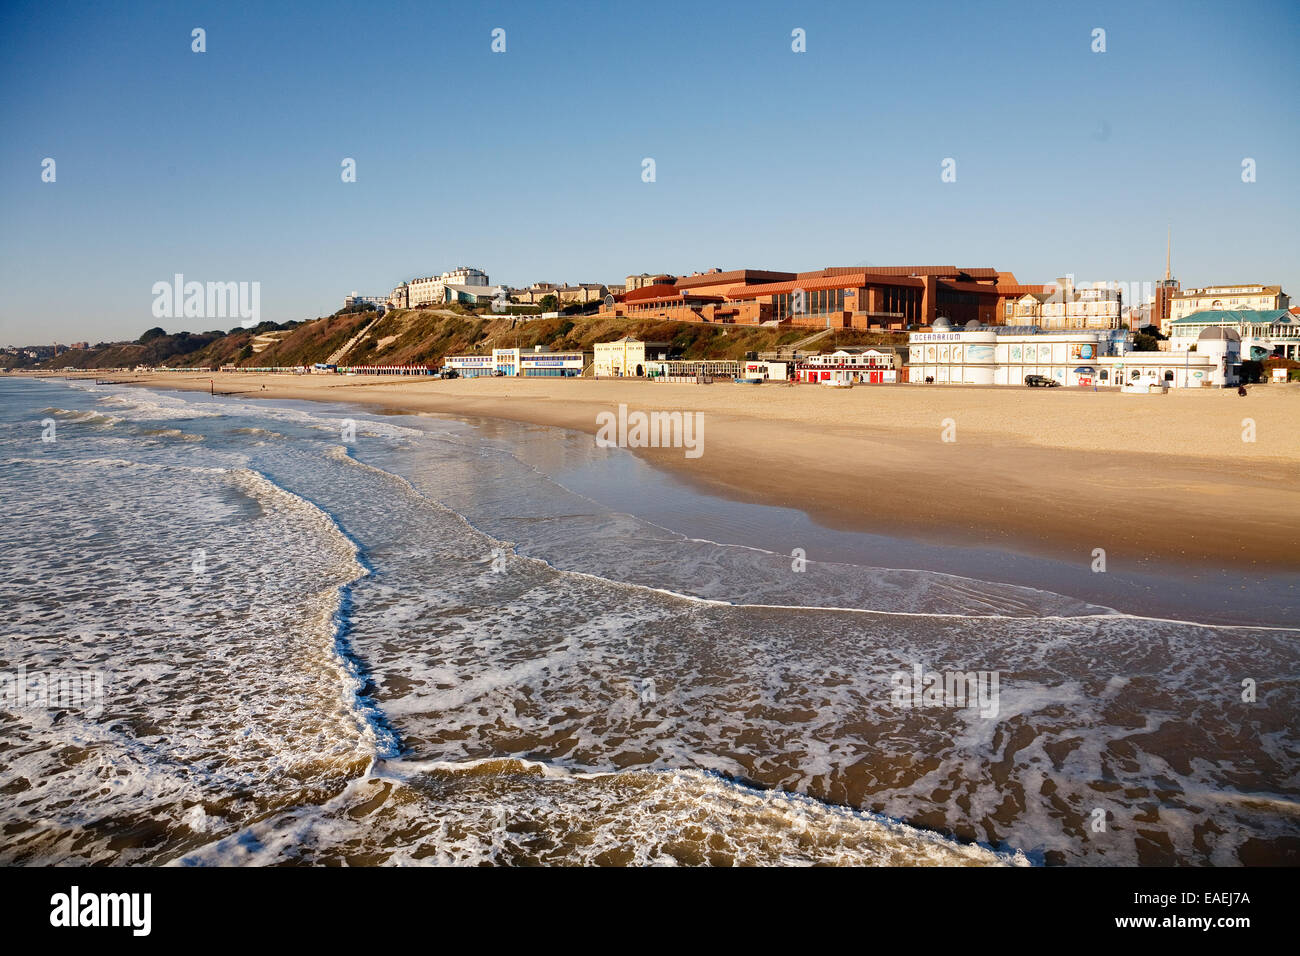 The empty sandy beach in Bournemouth, UK on sunny winter day Stock Photo